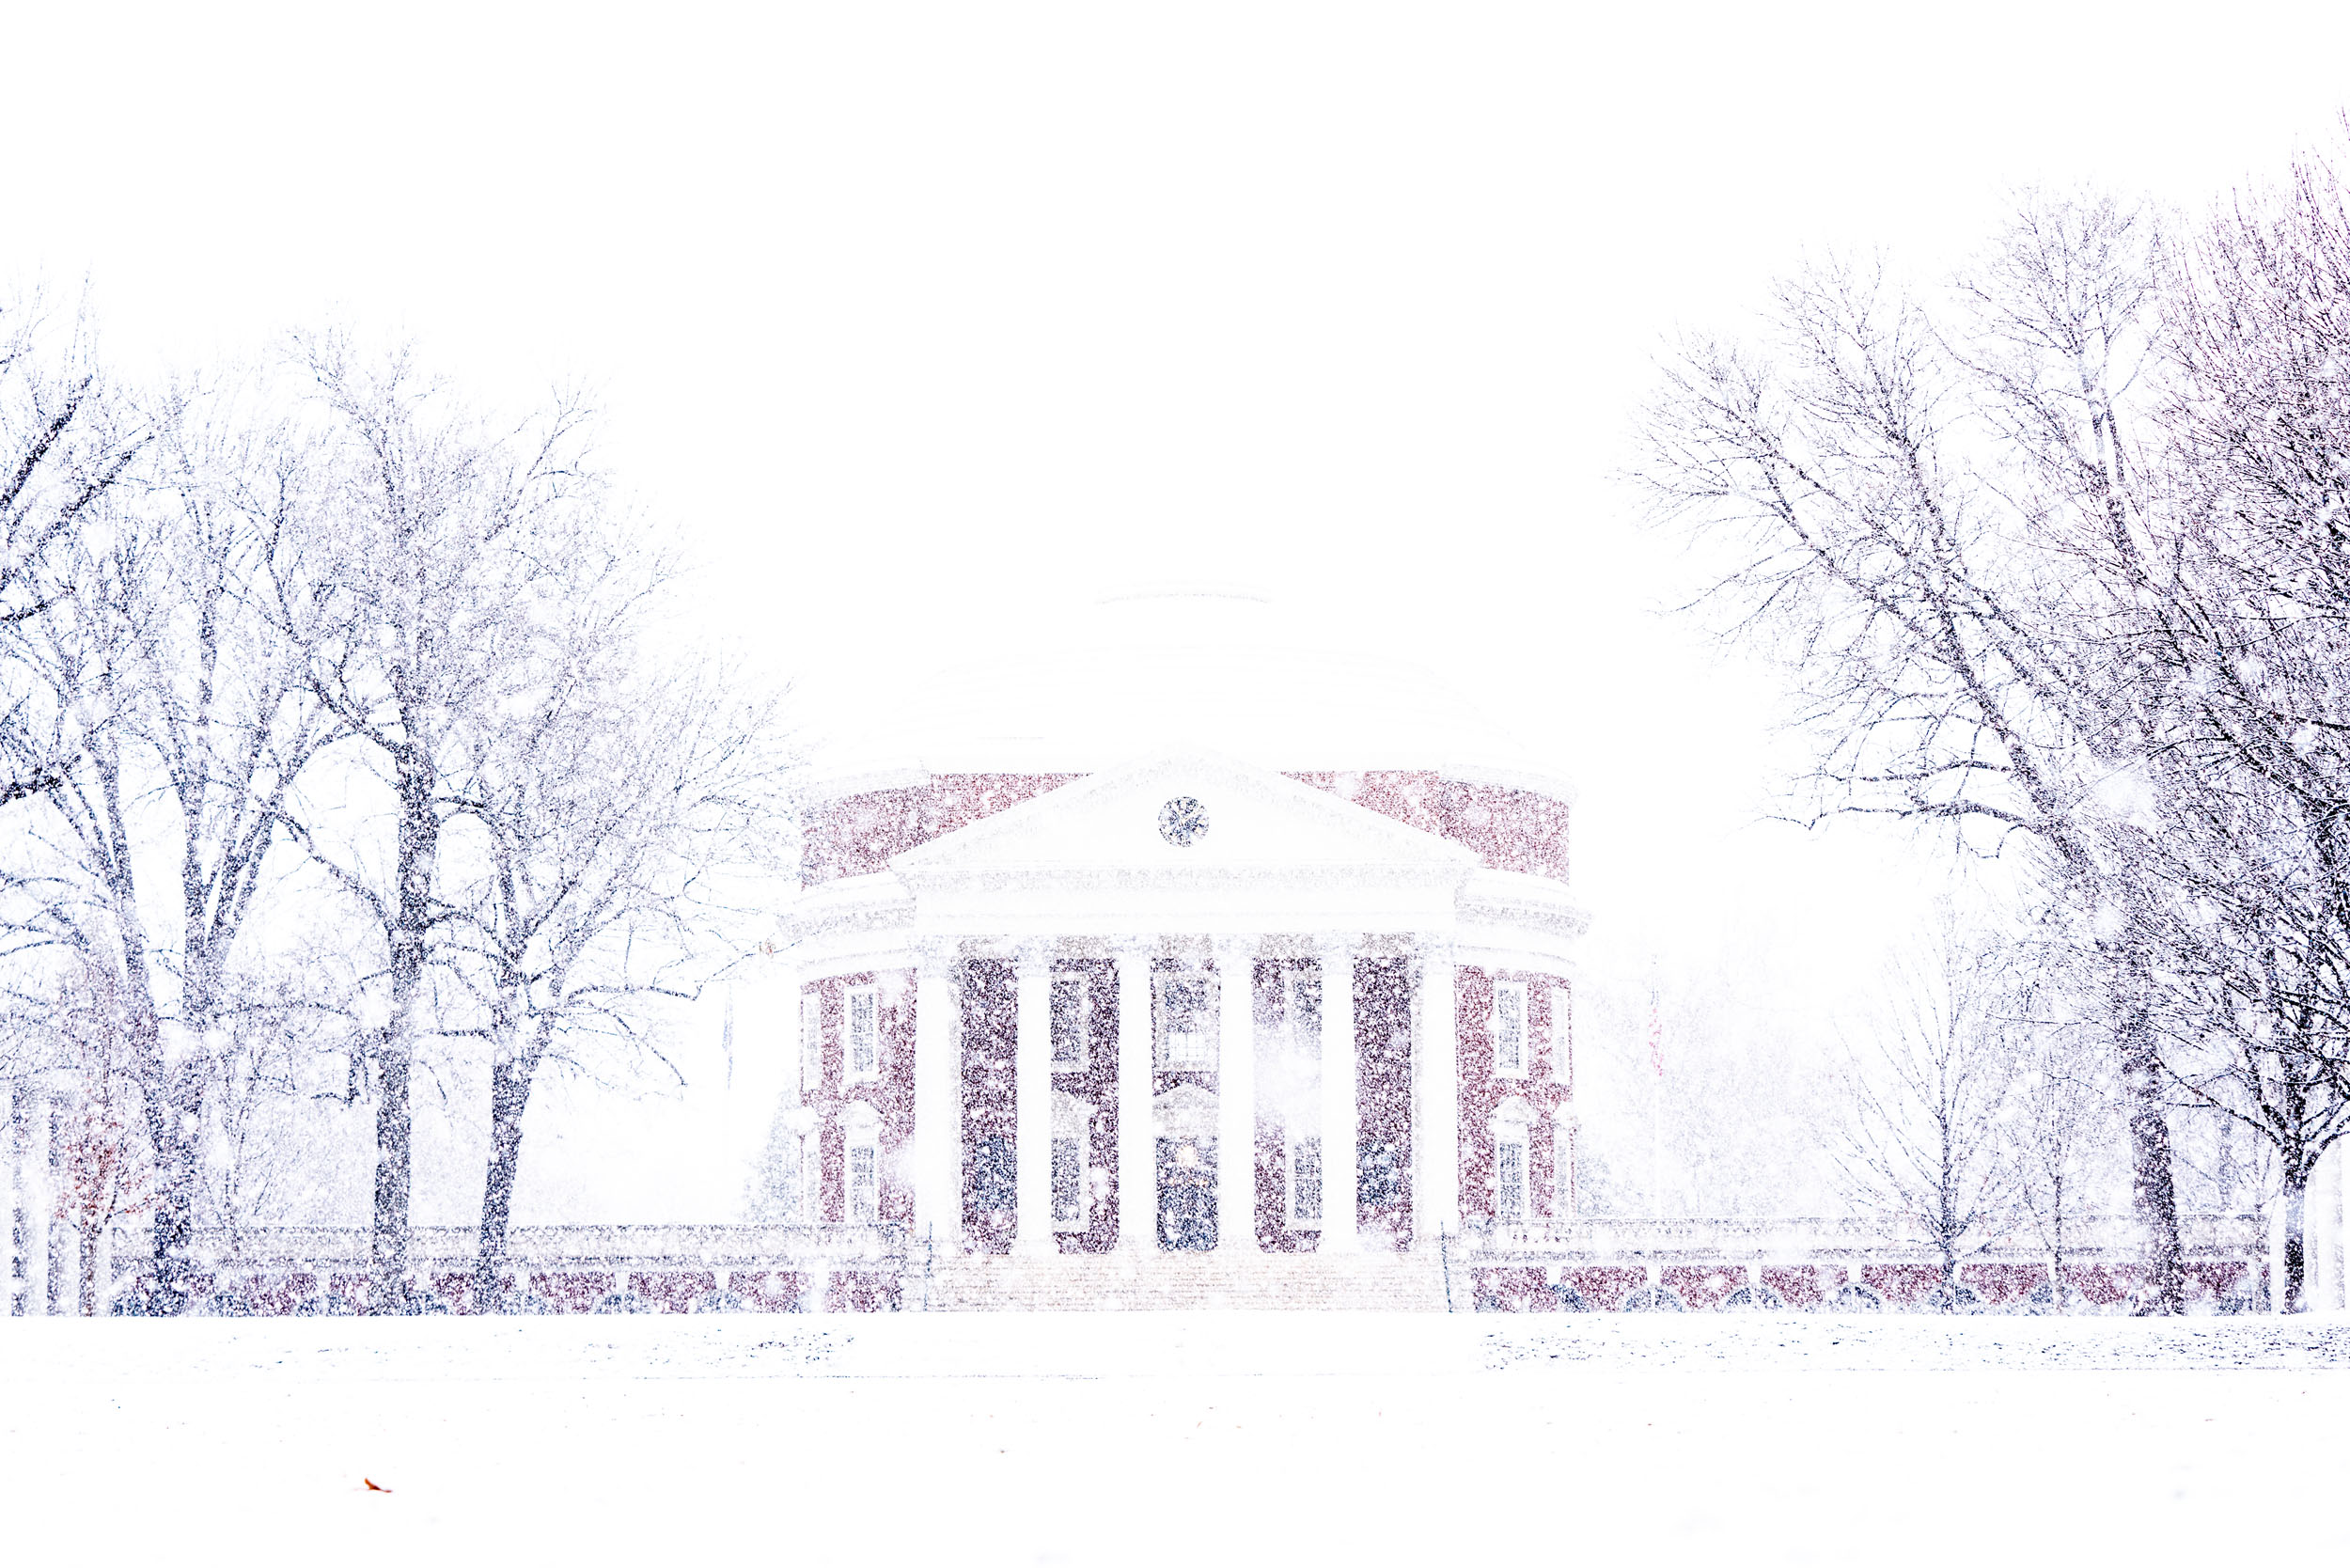 The Rotunda and the Lawn as it is snowing